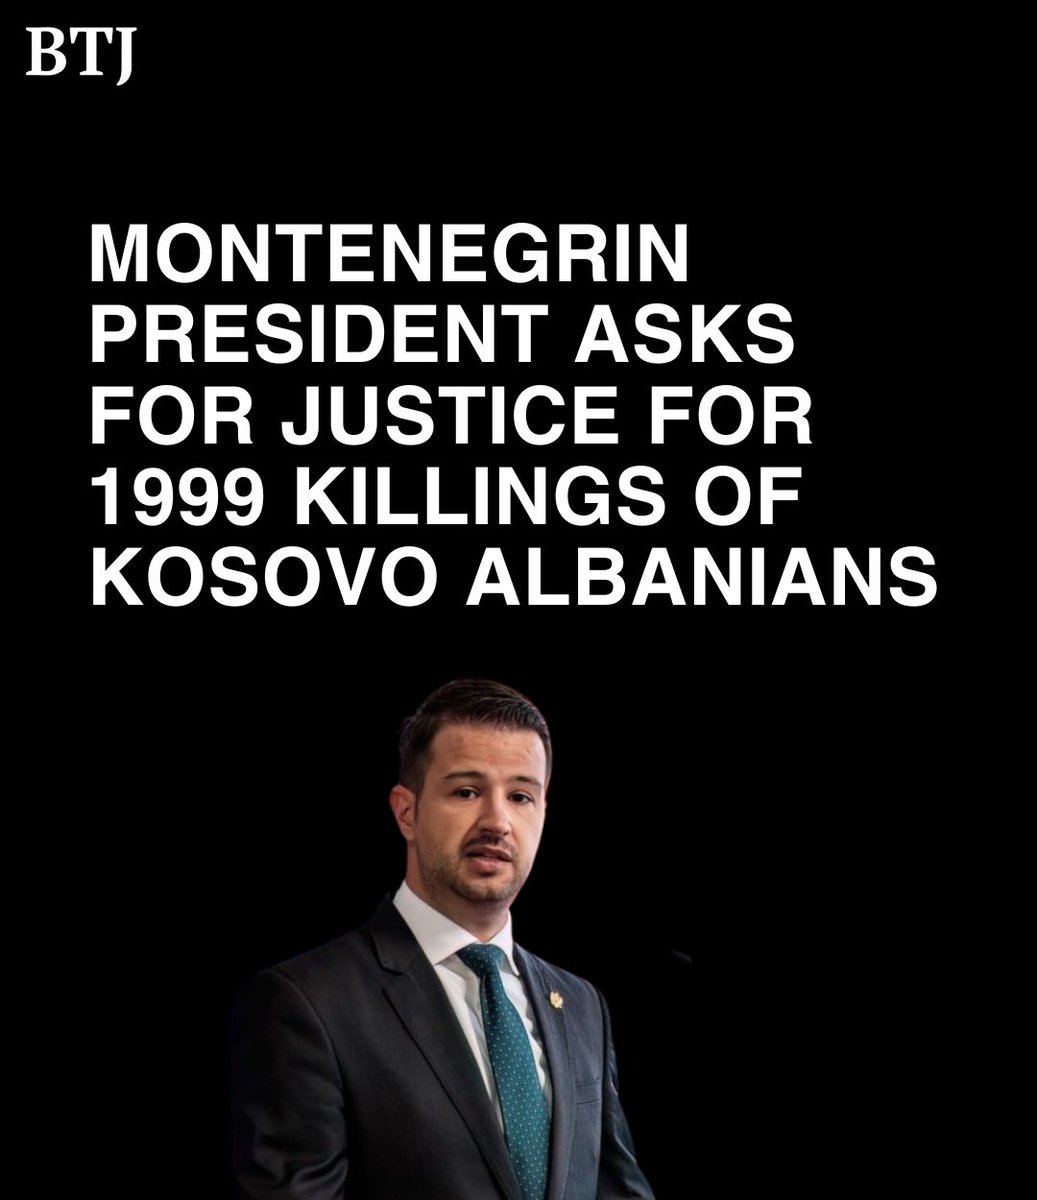 Exactly 25 years after Yugoslav Army troops killed 6 Kosovo Albanians, including 2 children, in a border village, the Montenegrin President says the quest for justice and truth about the crime must continue – and a memorial should be put up to the victims. balkaninsight.com/2024/04/18/mon…